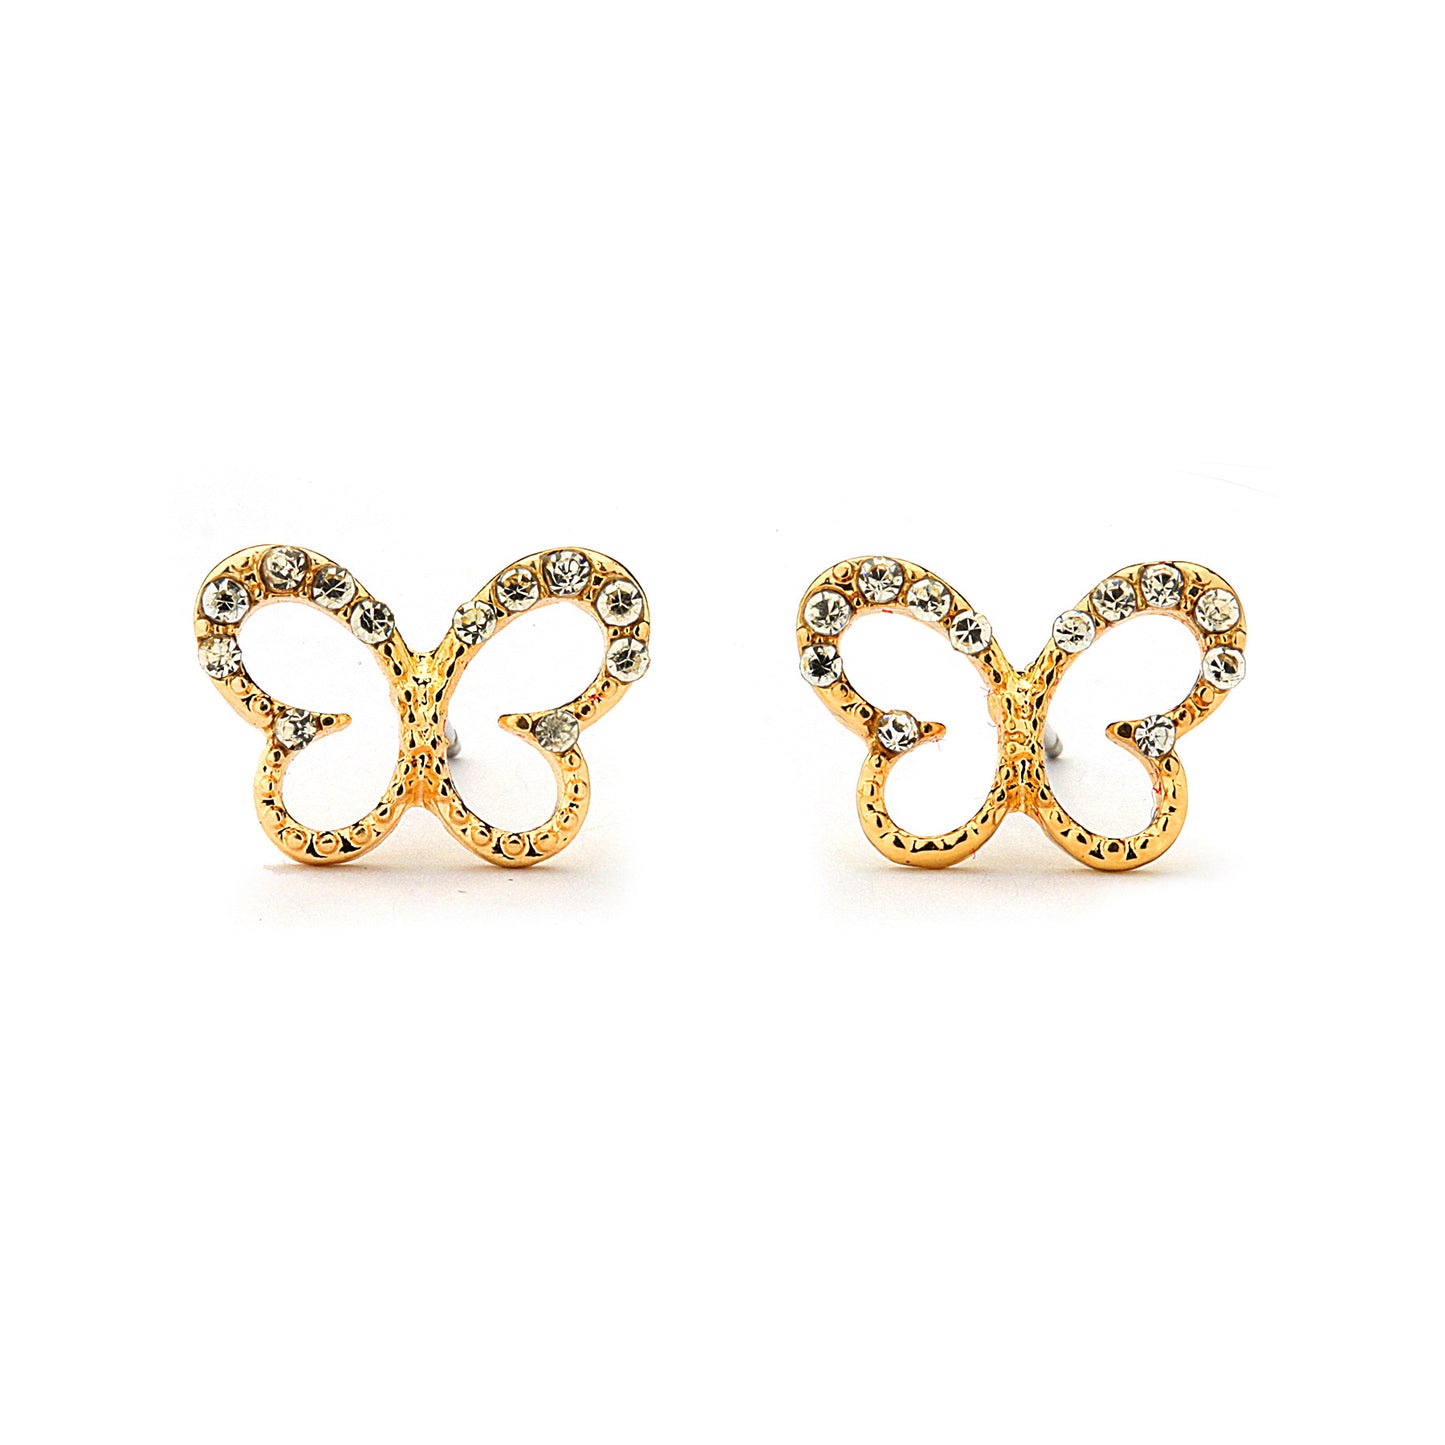 Pave CZ Butterfly Earrings 14-kt Gold Filled